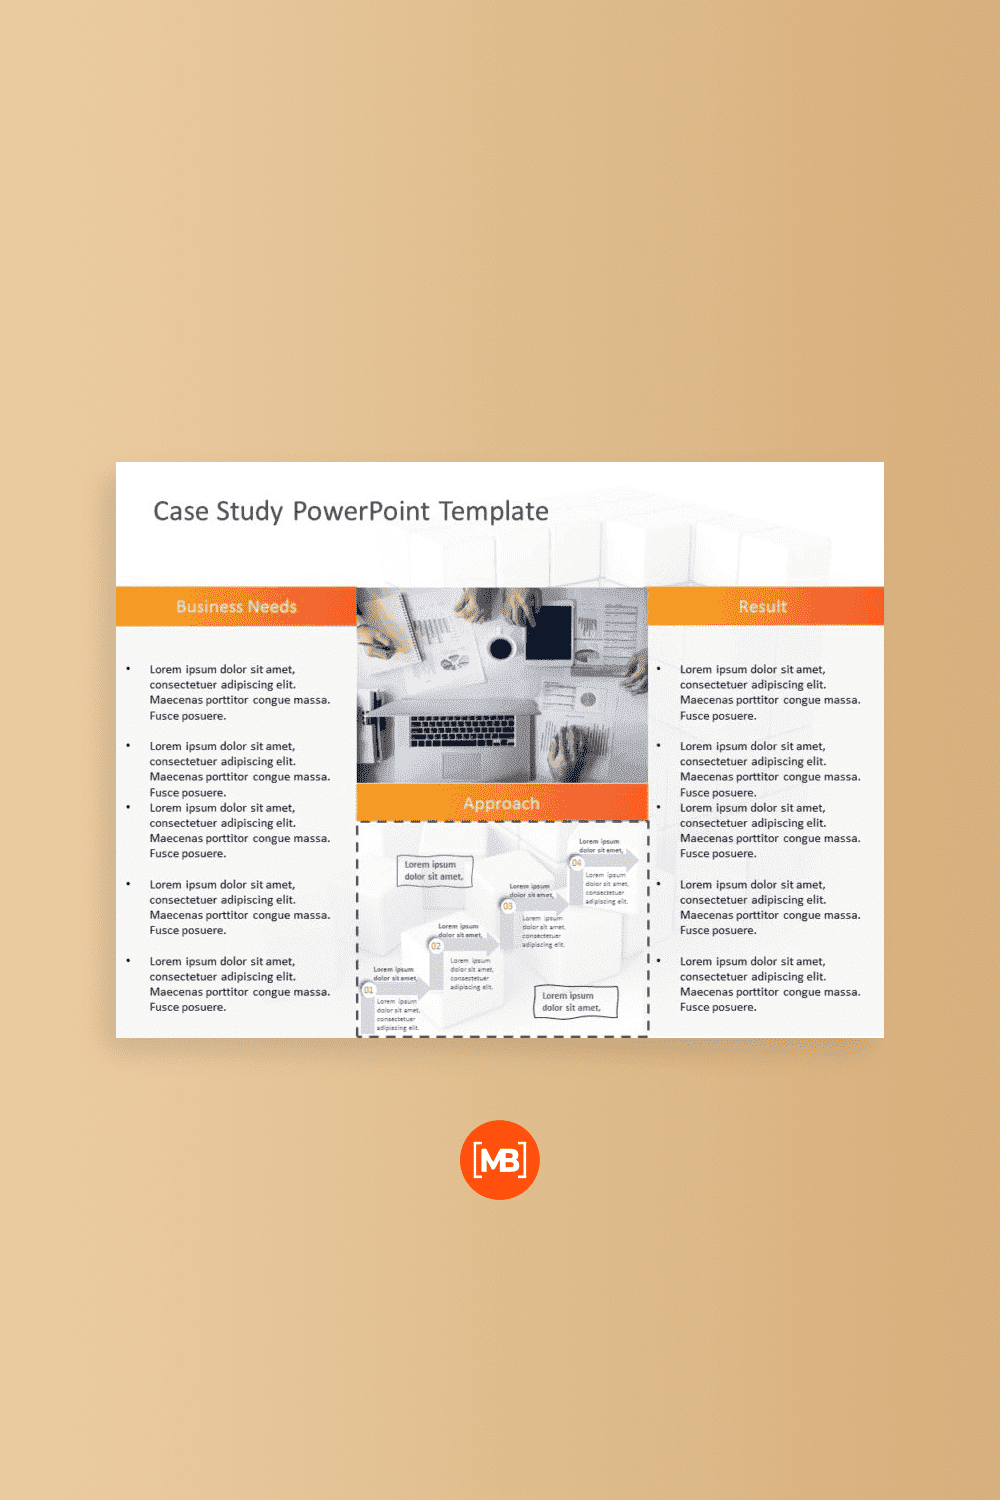 Animated case study powerpoint template.